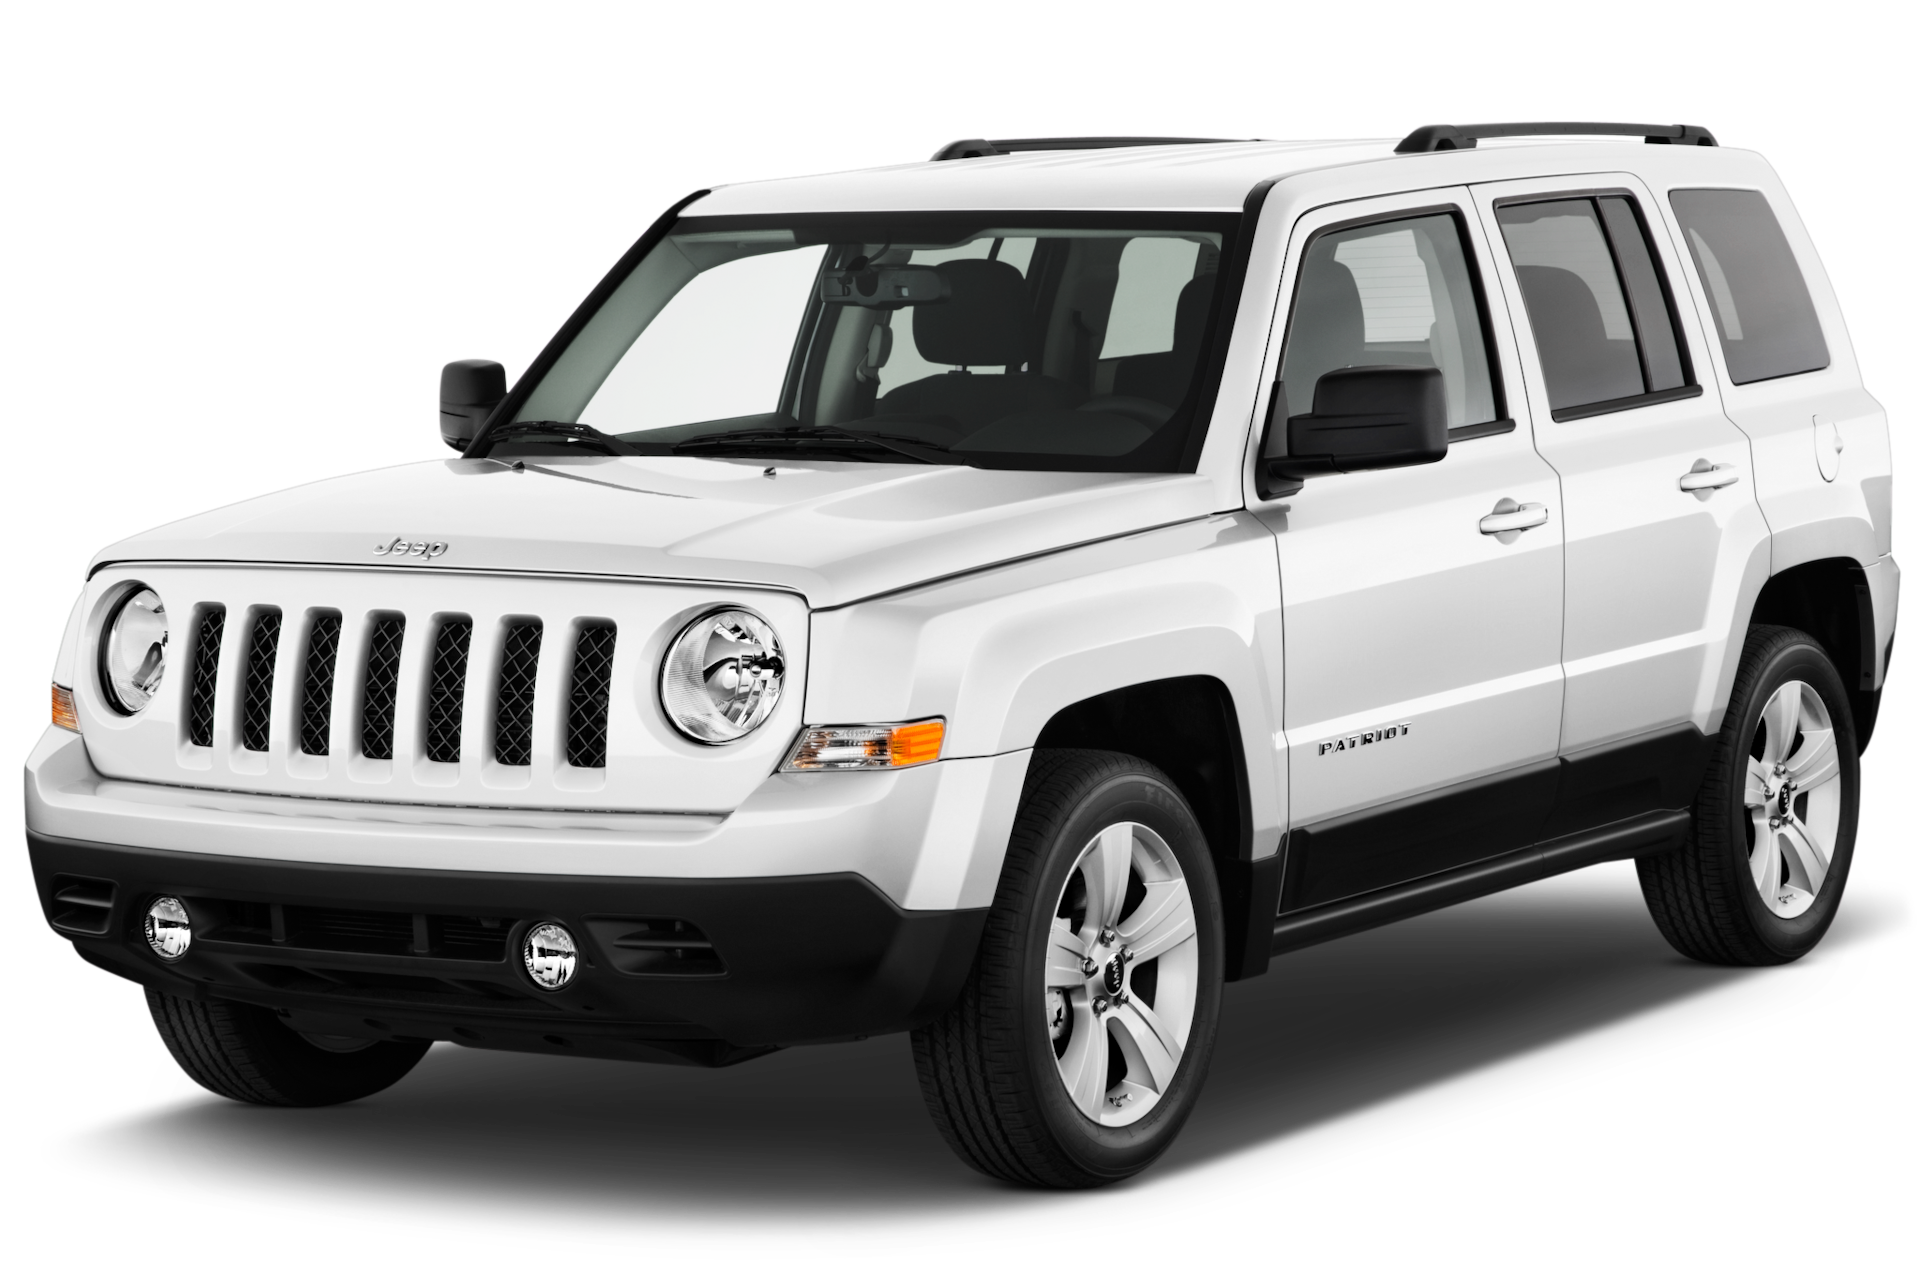 2017 Jeep Patriot Prices, Reviews, and Photos - MotorTrend